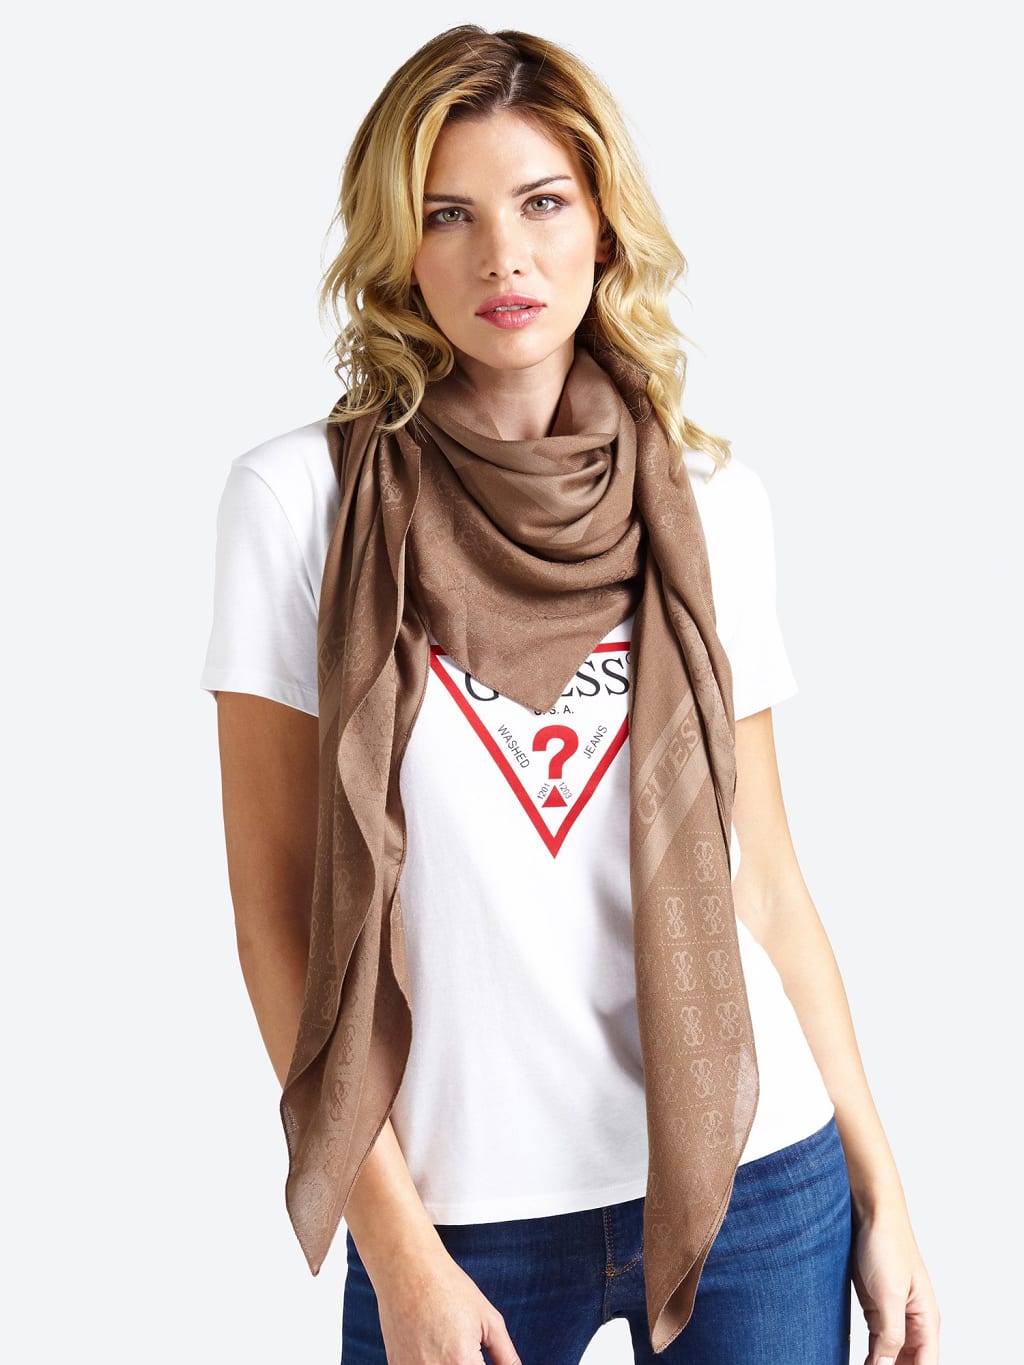 GUESS, Burgundy Women's Scarves And Foulards